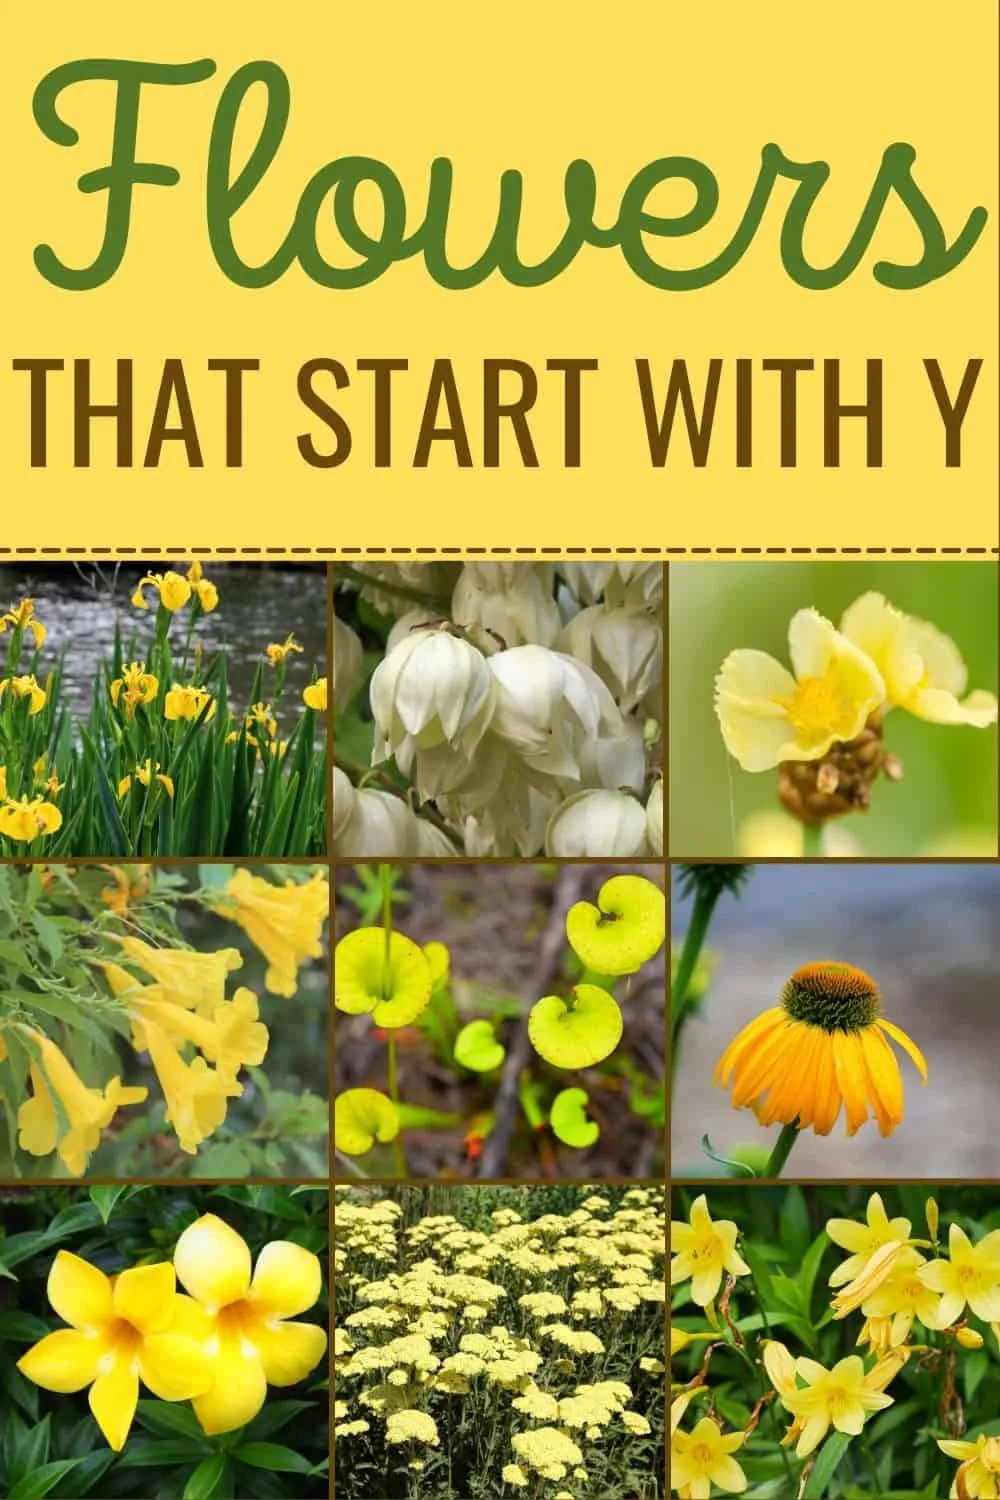 Flowers that start with Y